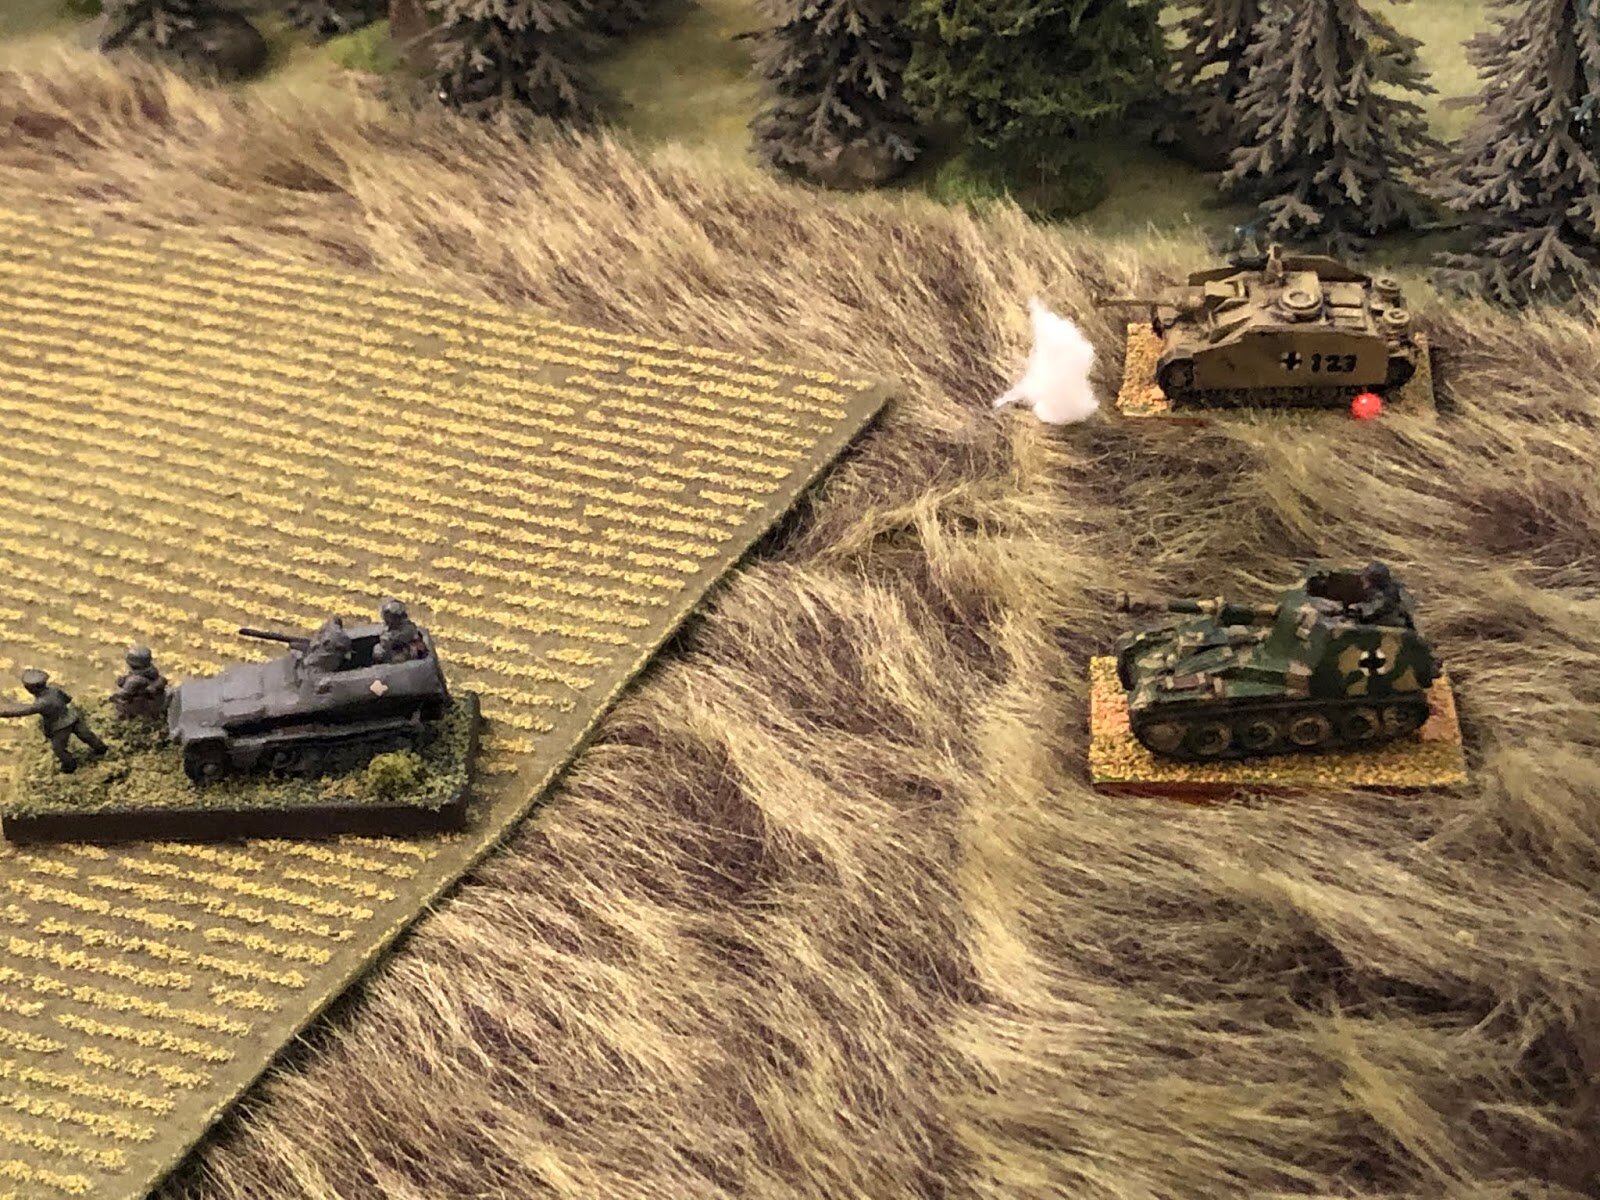  While a third round is just short of the other Stug (top right), suppressing the crew! 